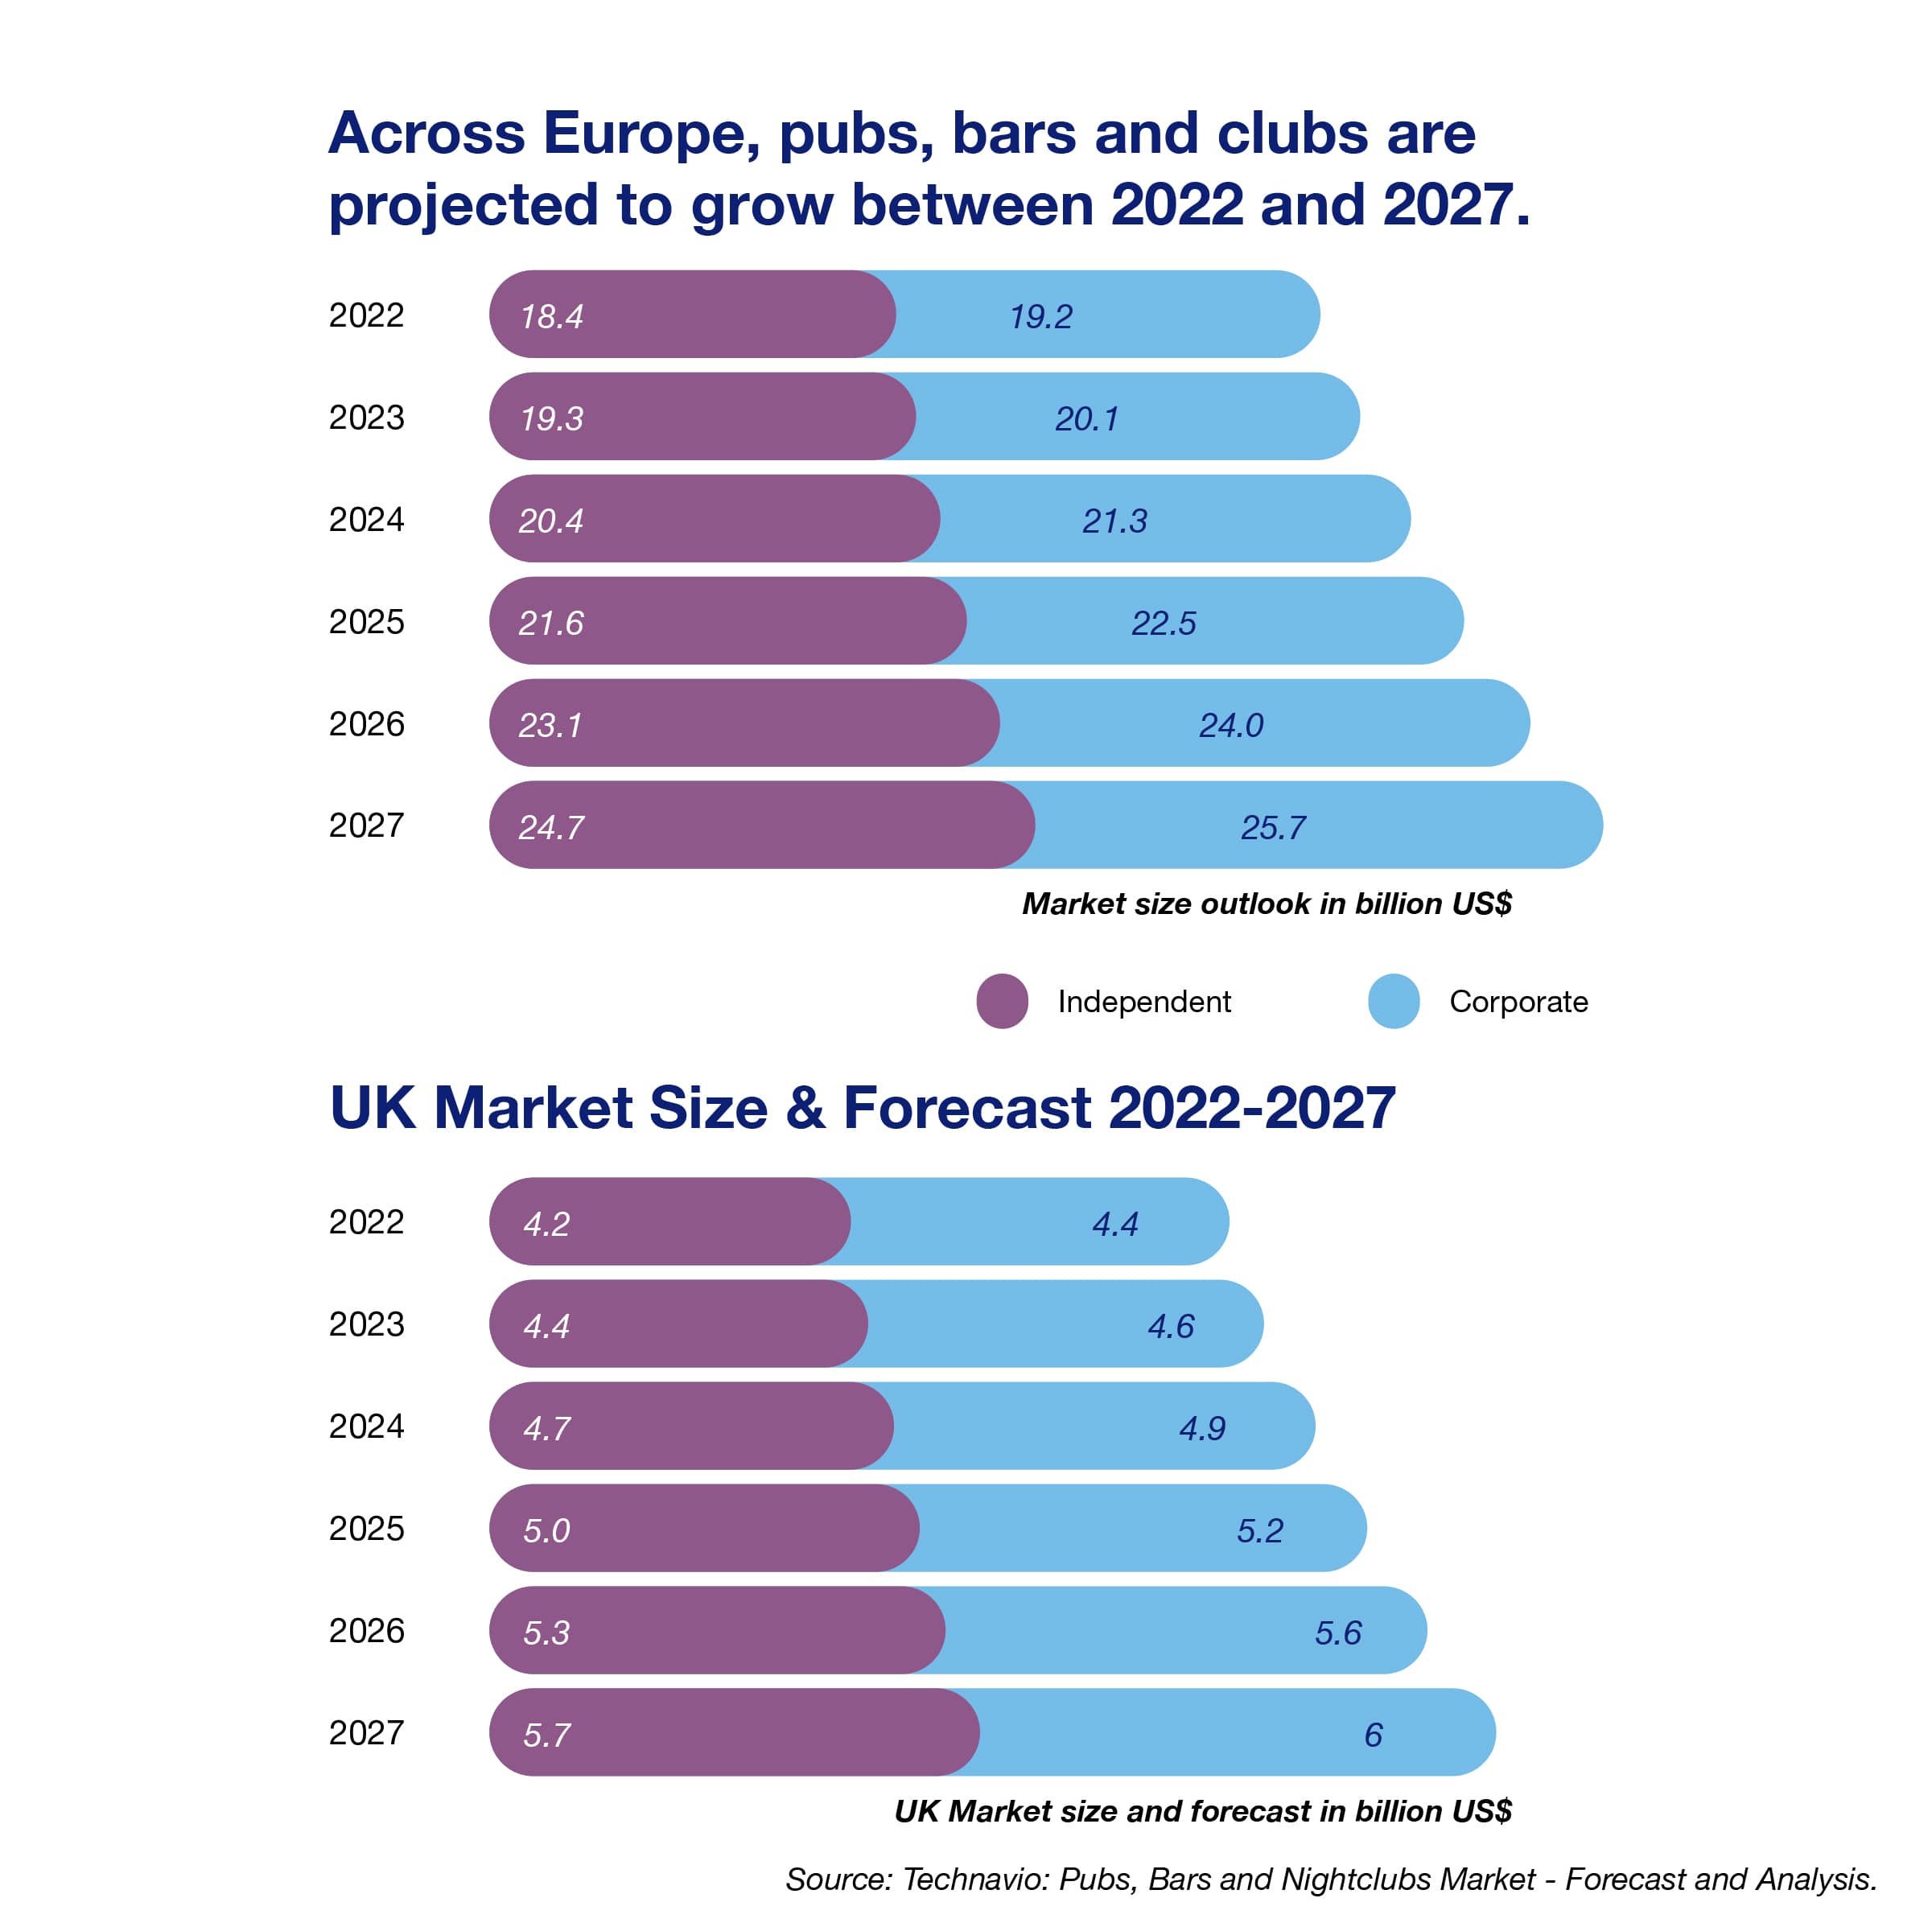 Across Europe, pubs, bars and clubs are projected to grow between 2022 and 2027.